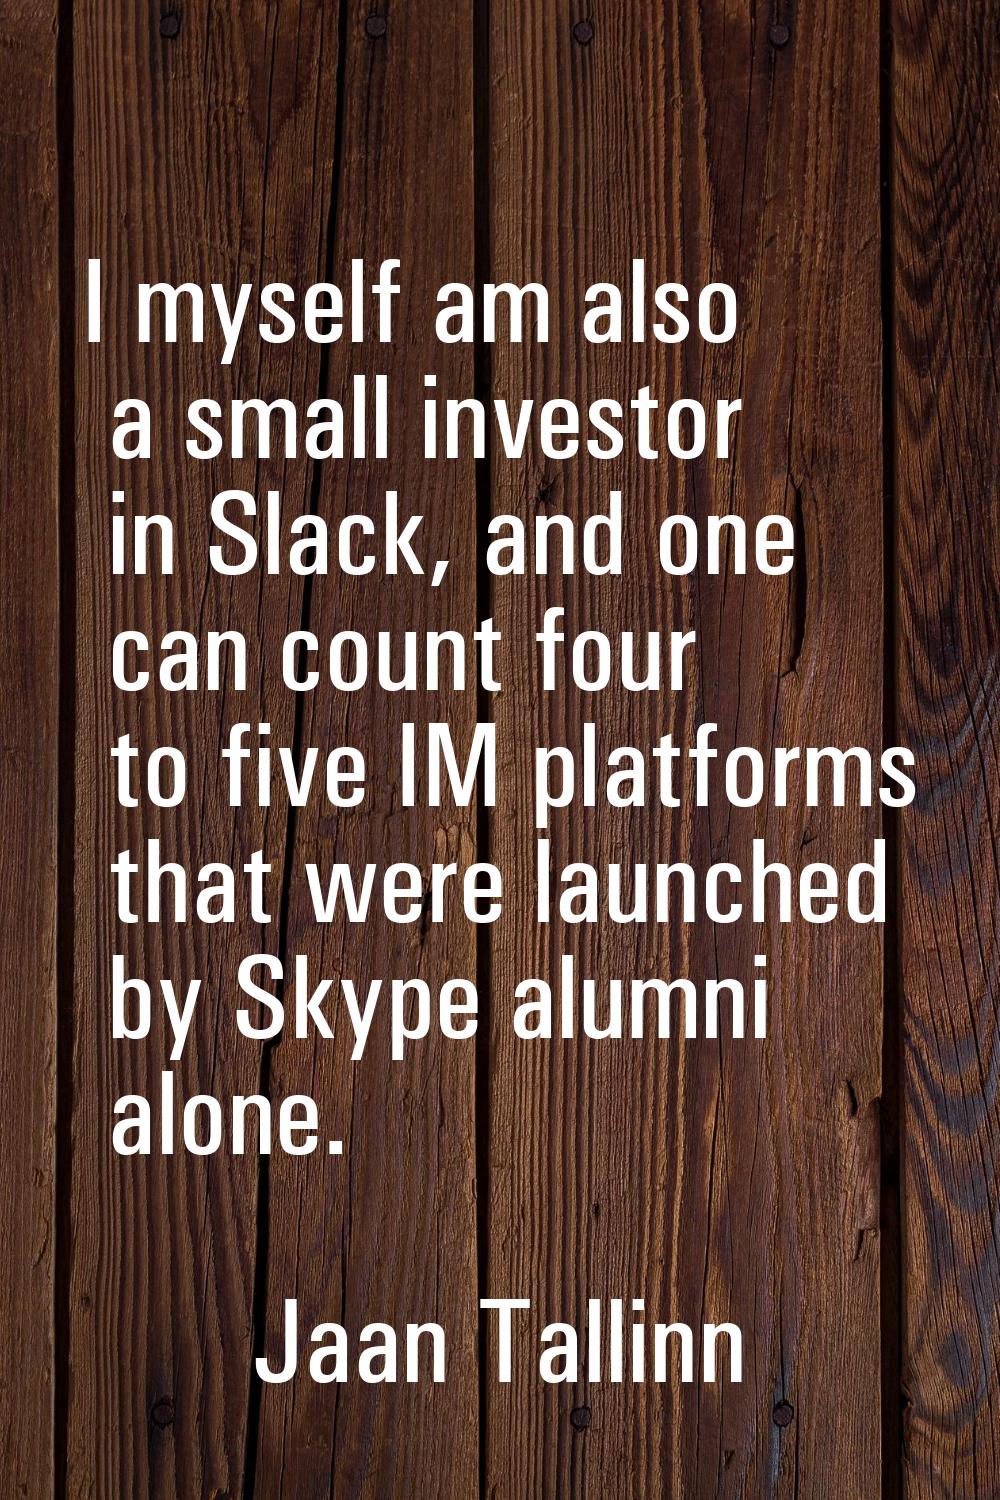 I myself am also a small investor in Slack, and one can count four to five IM platforms that were l